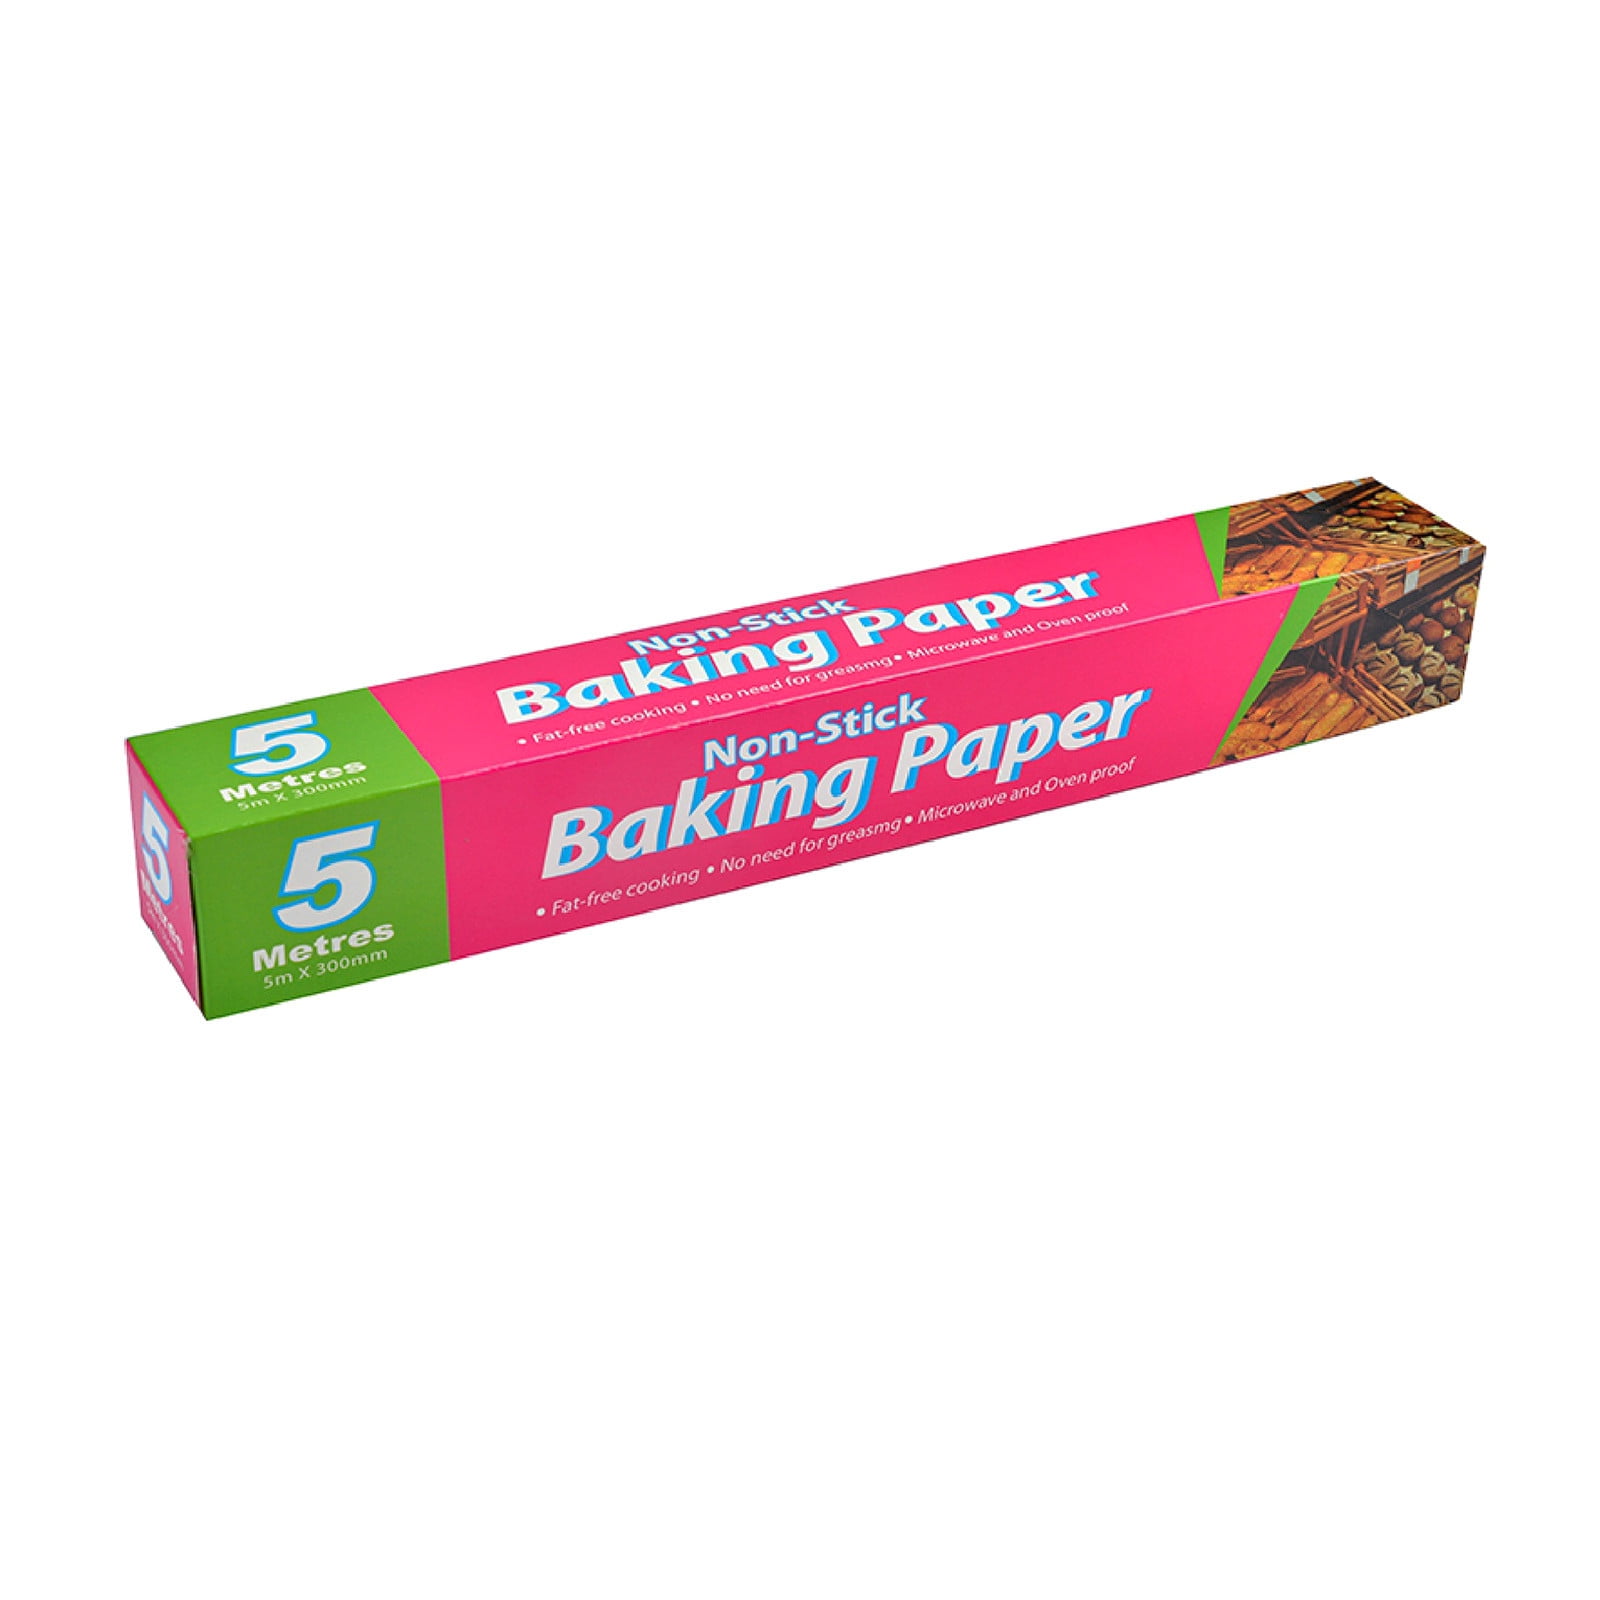 Unbleached Parchment Paper Roll for Baking 12 in x 315 in, Heavy Duty &  Non-stick Baking Paper with Slide Cutter, Brown Parchment Paper for  Cooking